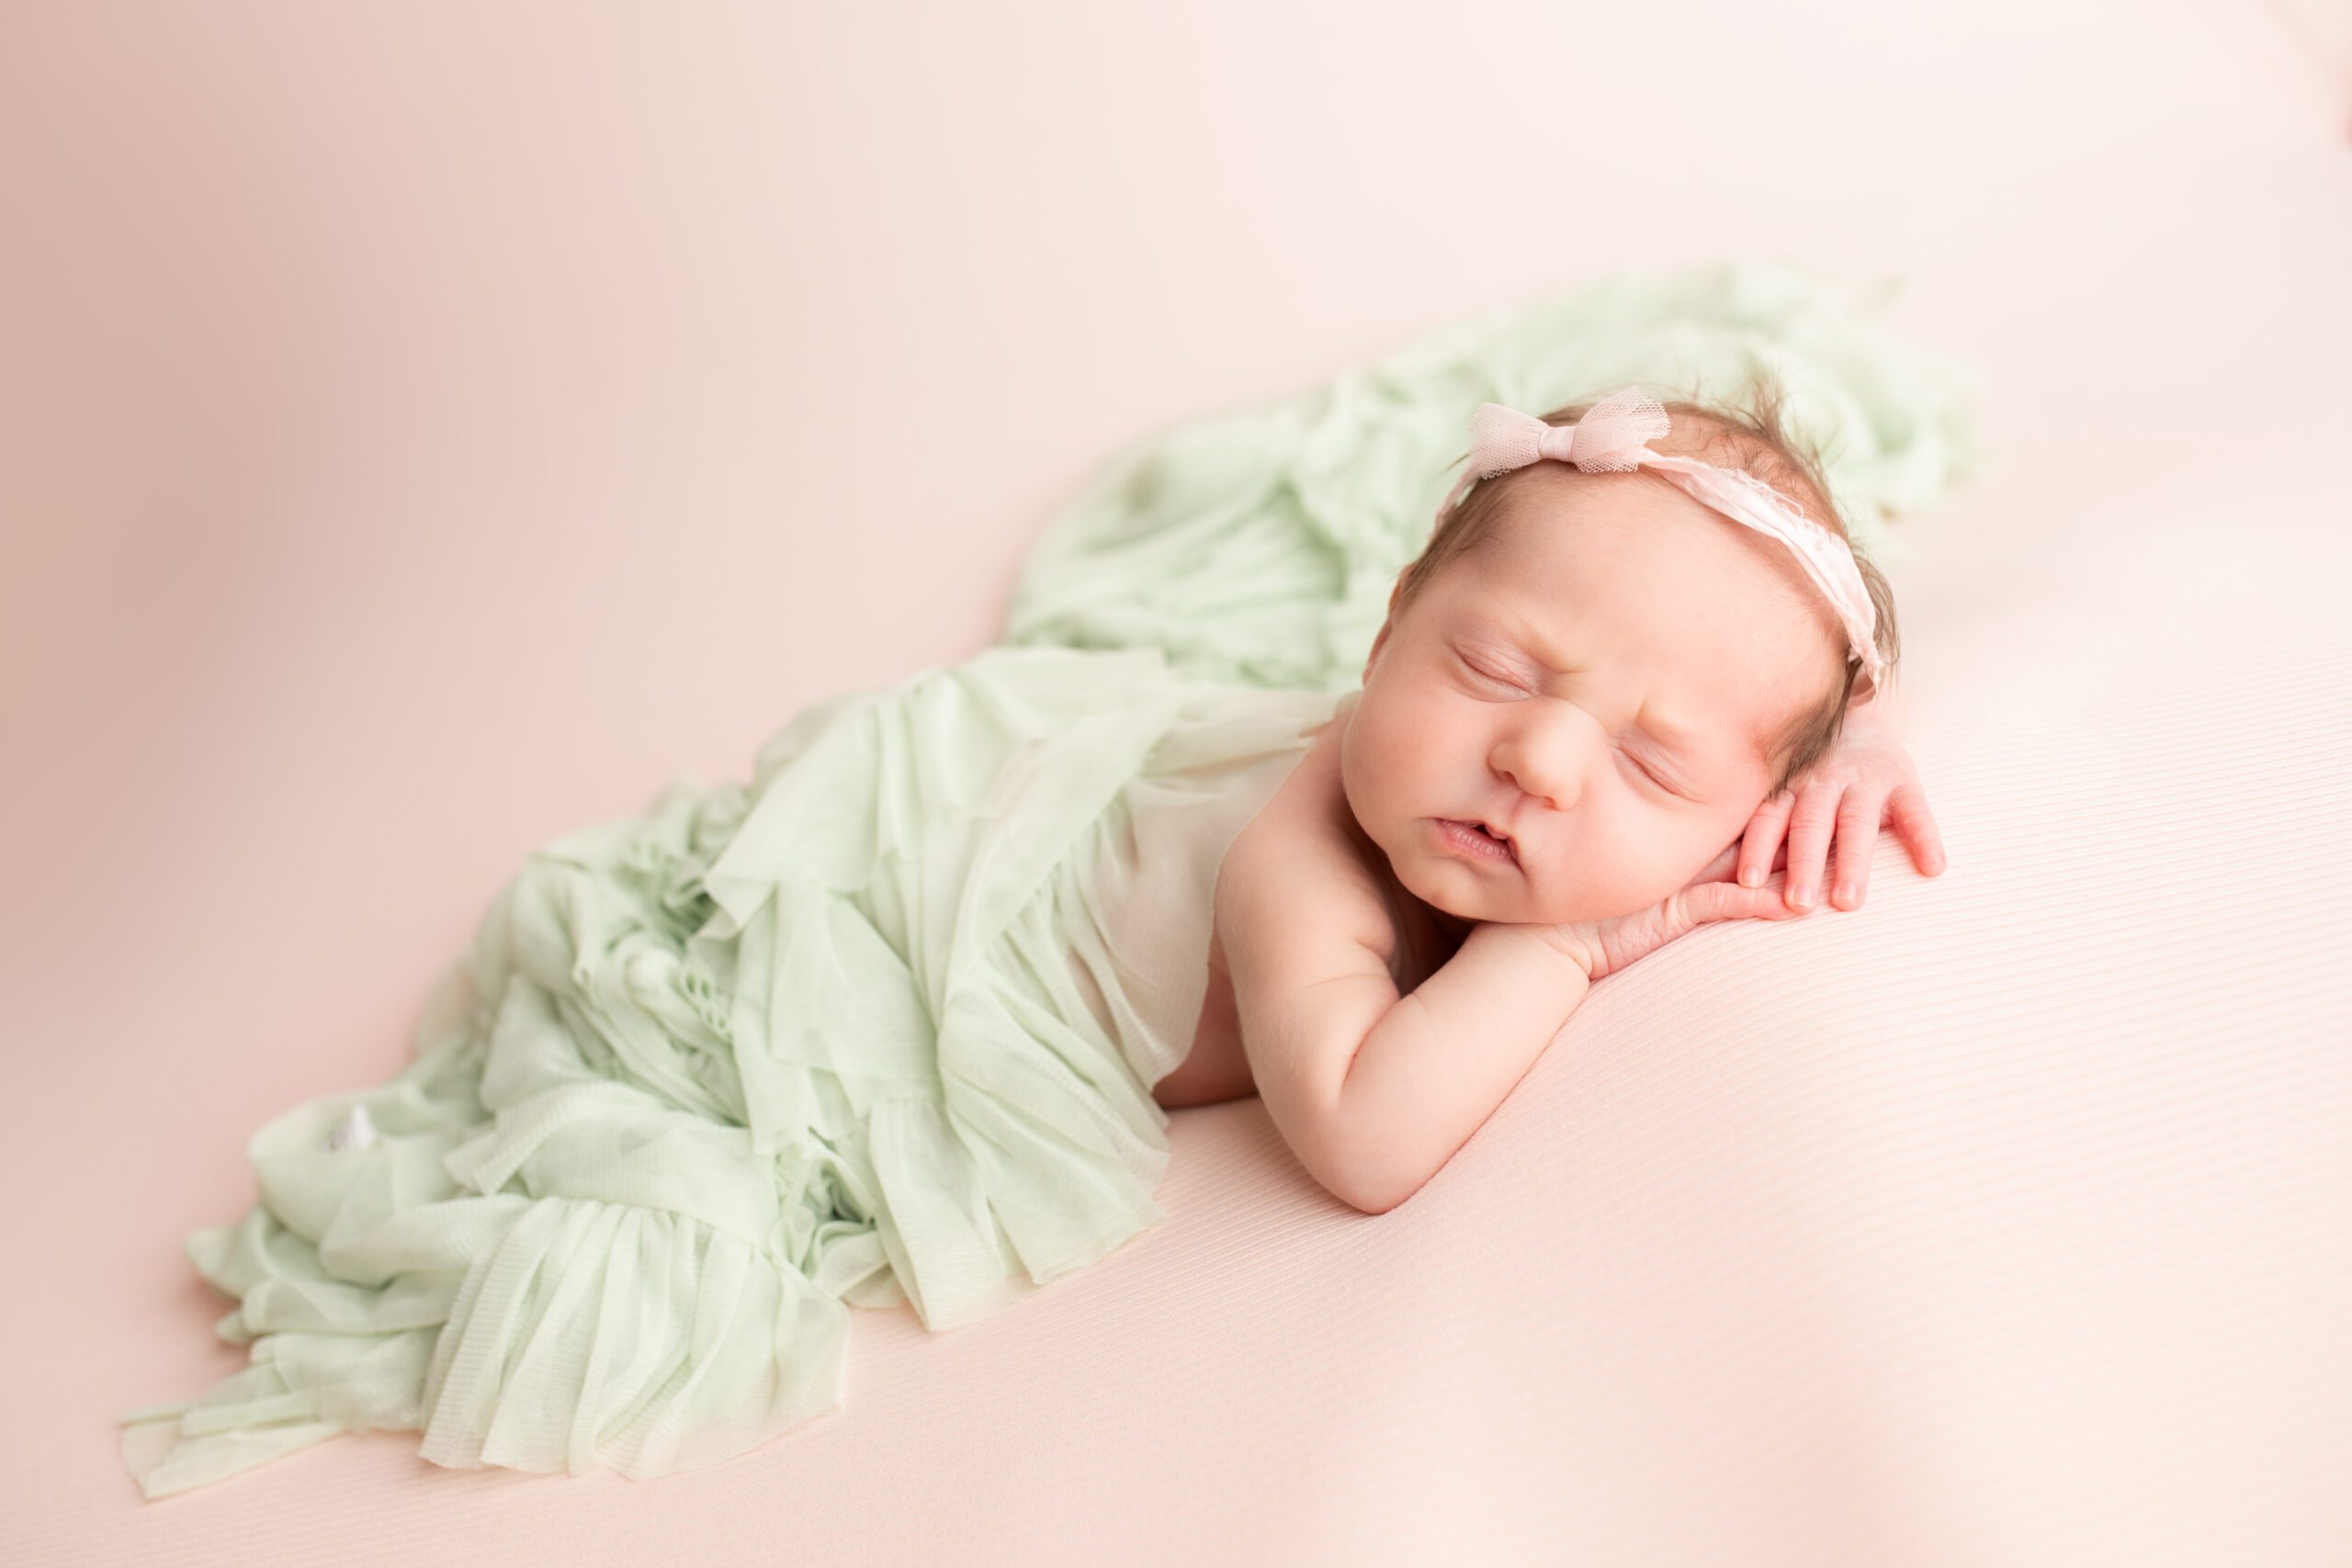 newborn girl is laying on her tummy onto of a pink fabric. her diaper and back has a light green ruffle fabric draped over it. she has a light pink chiffon headband with a small bow. the newborn has her hands resting under her chin
